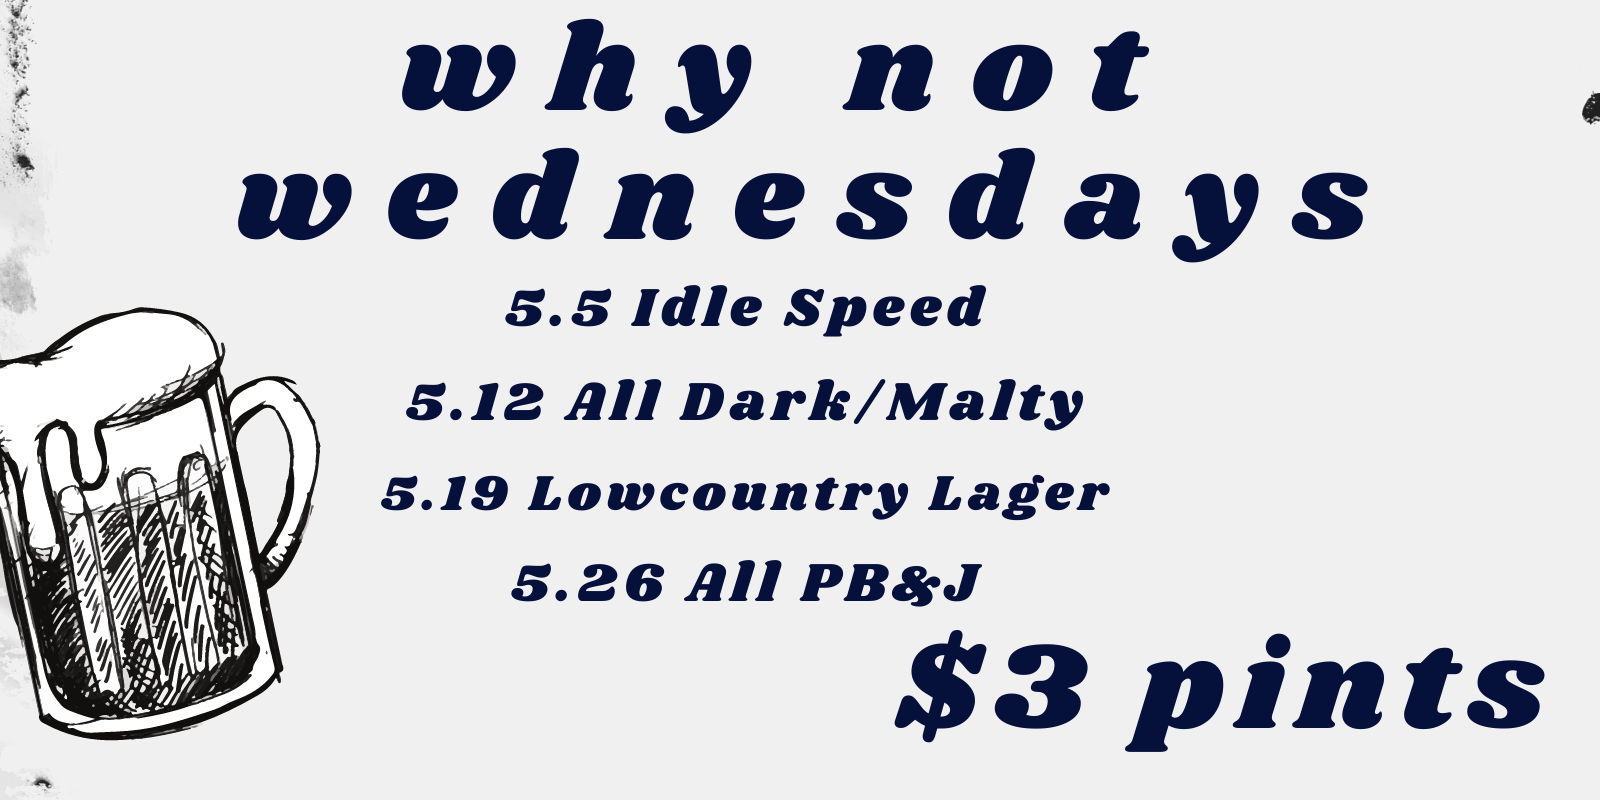 Why Not Wednesdays: All Dark & Malty Brews promotional image